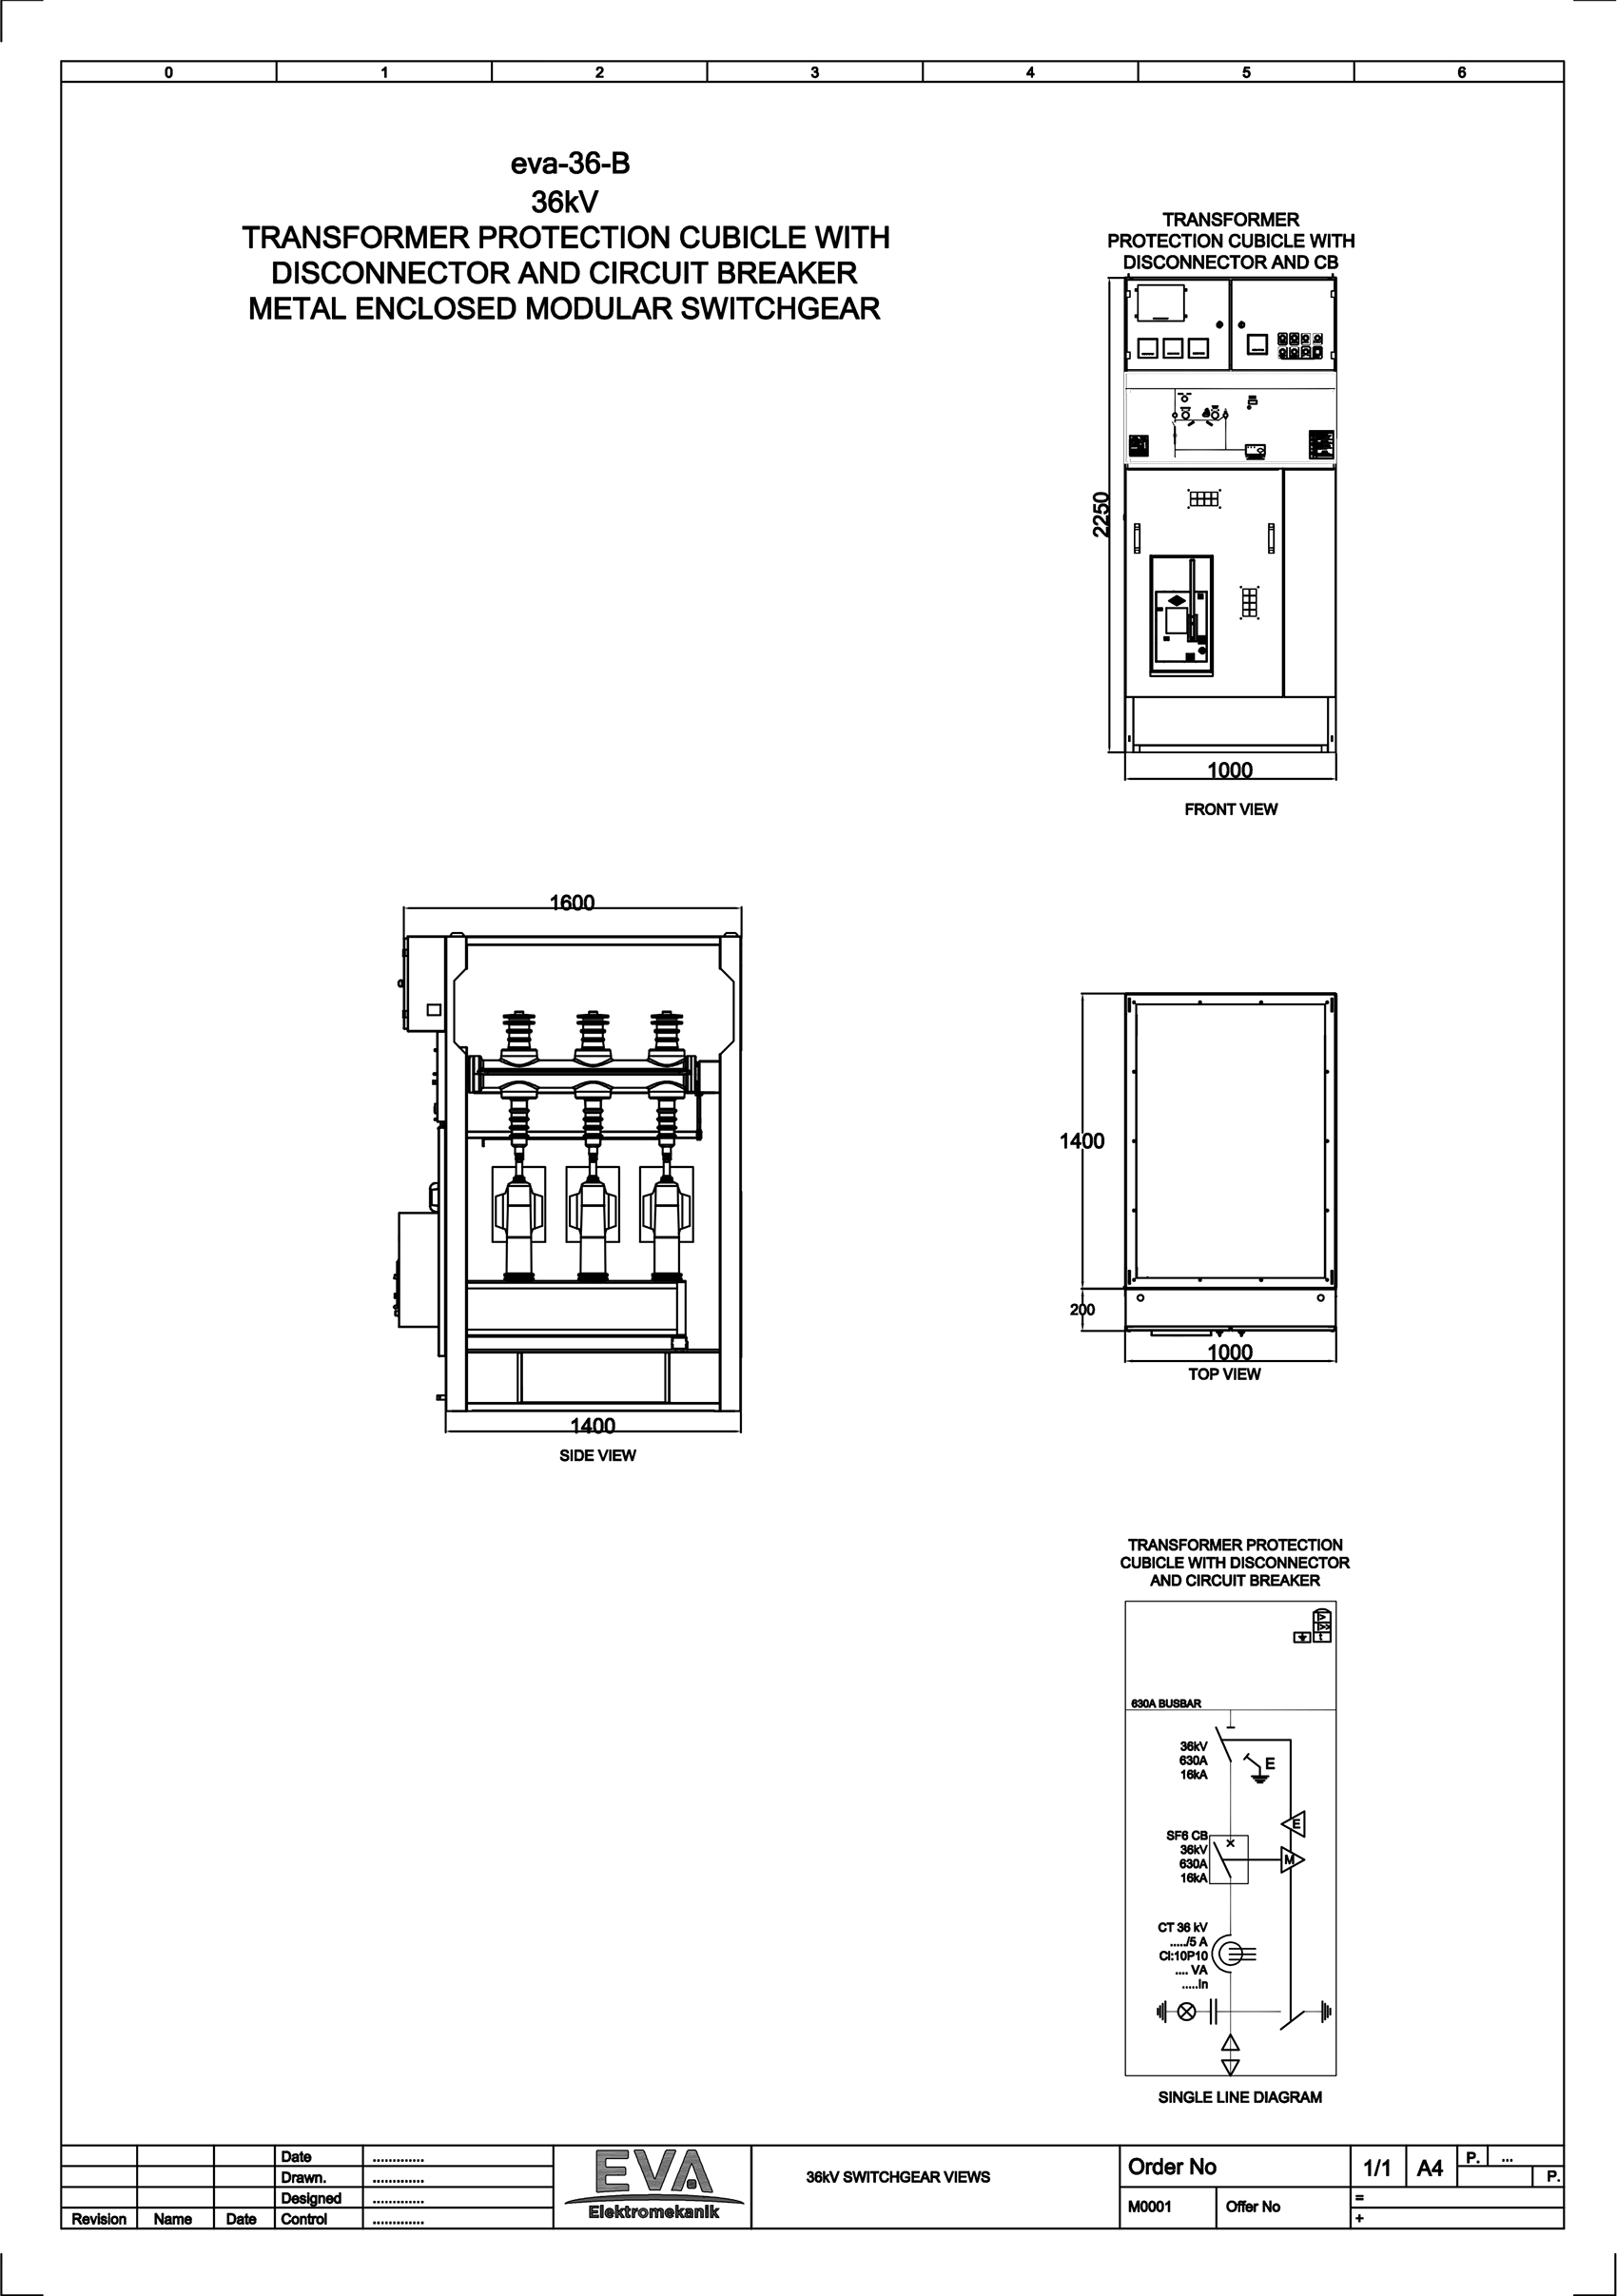 Transformer Protection Cubicle with Disconnector and Circuit Breaker (CB)